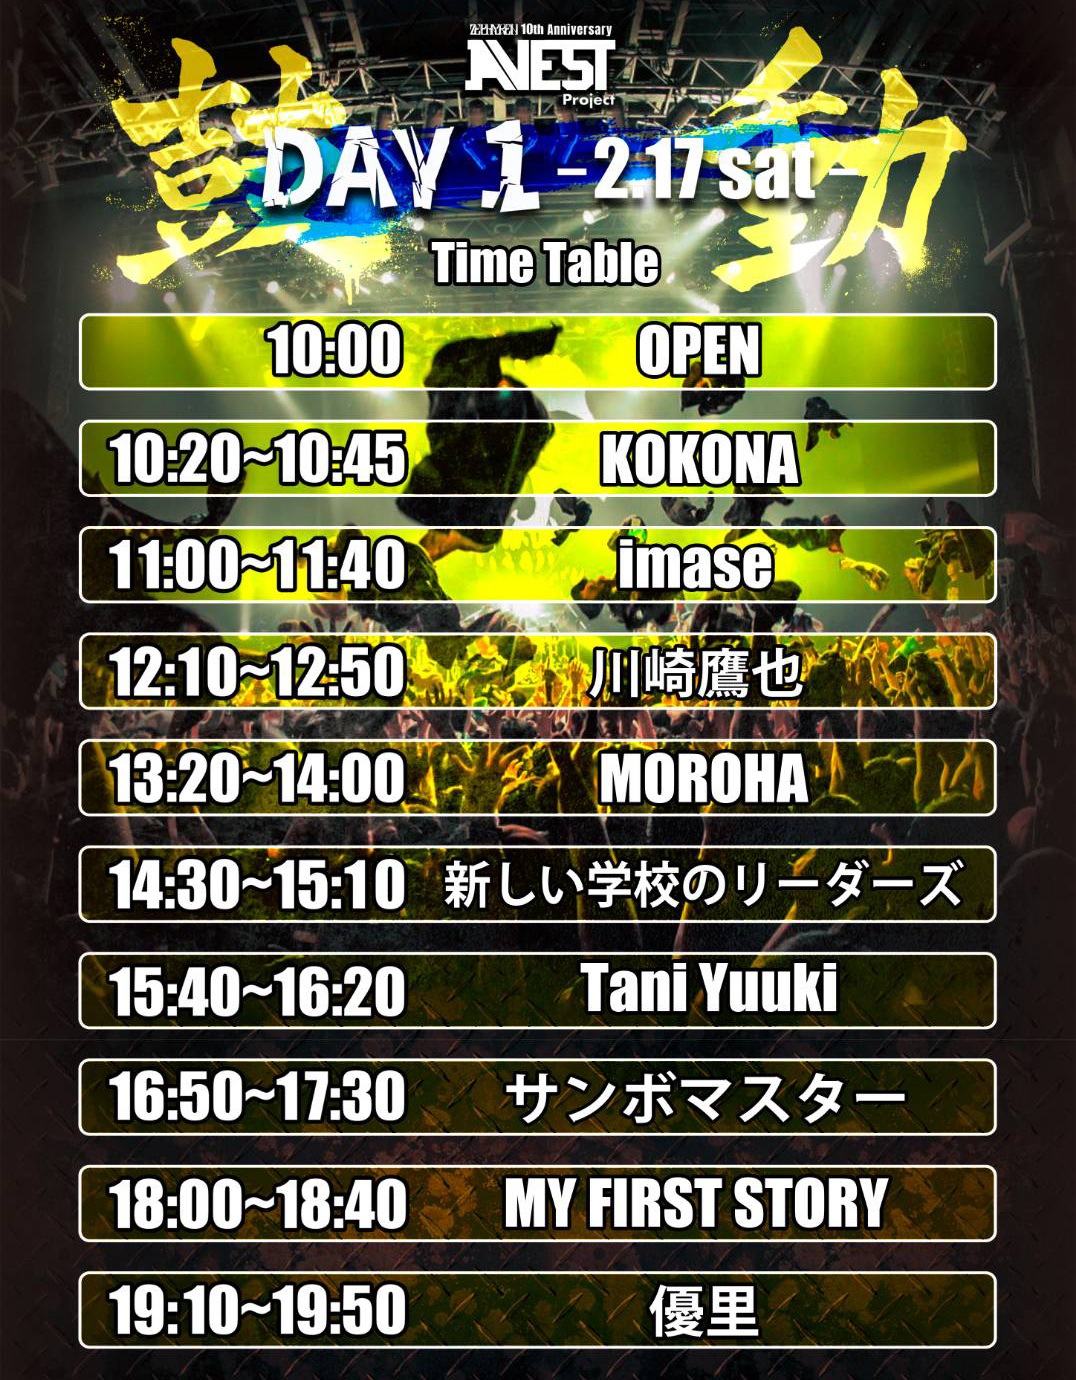 TIME TABLE DAY 1